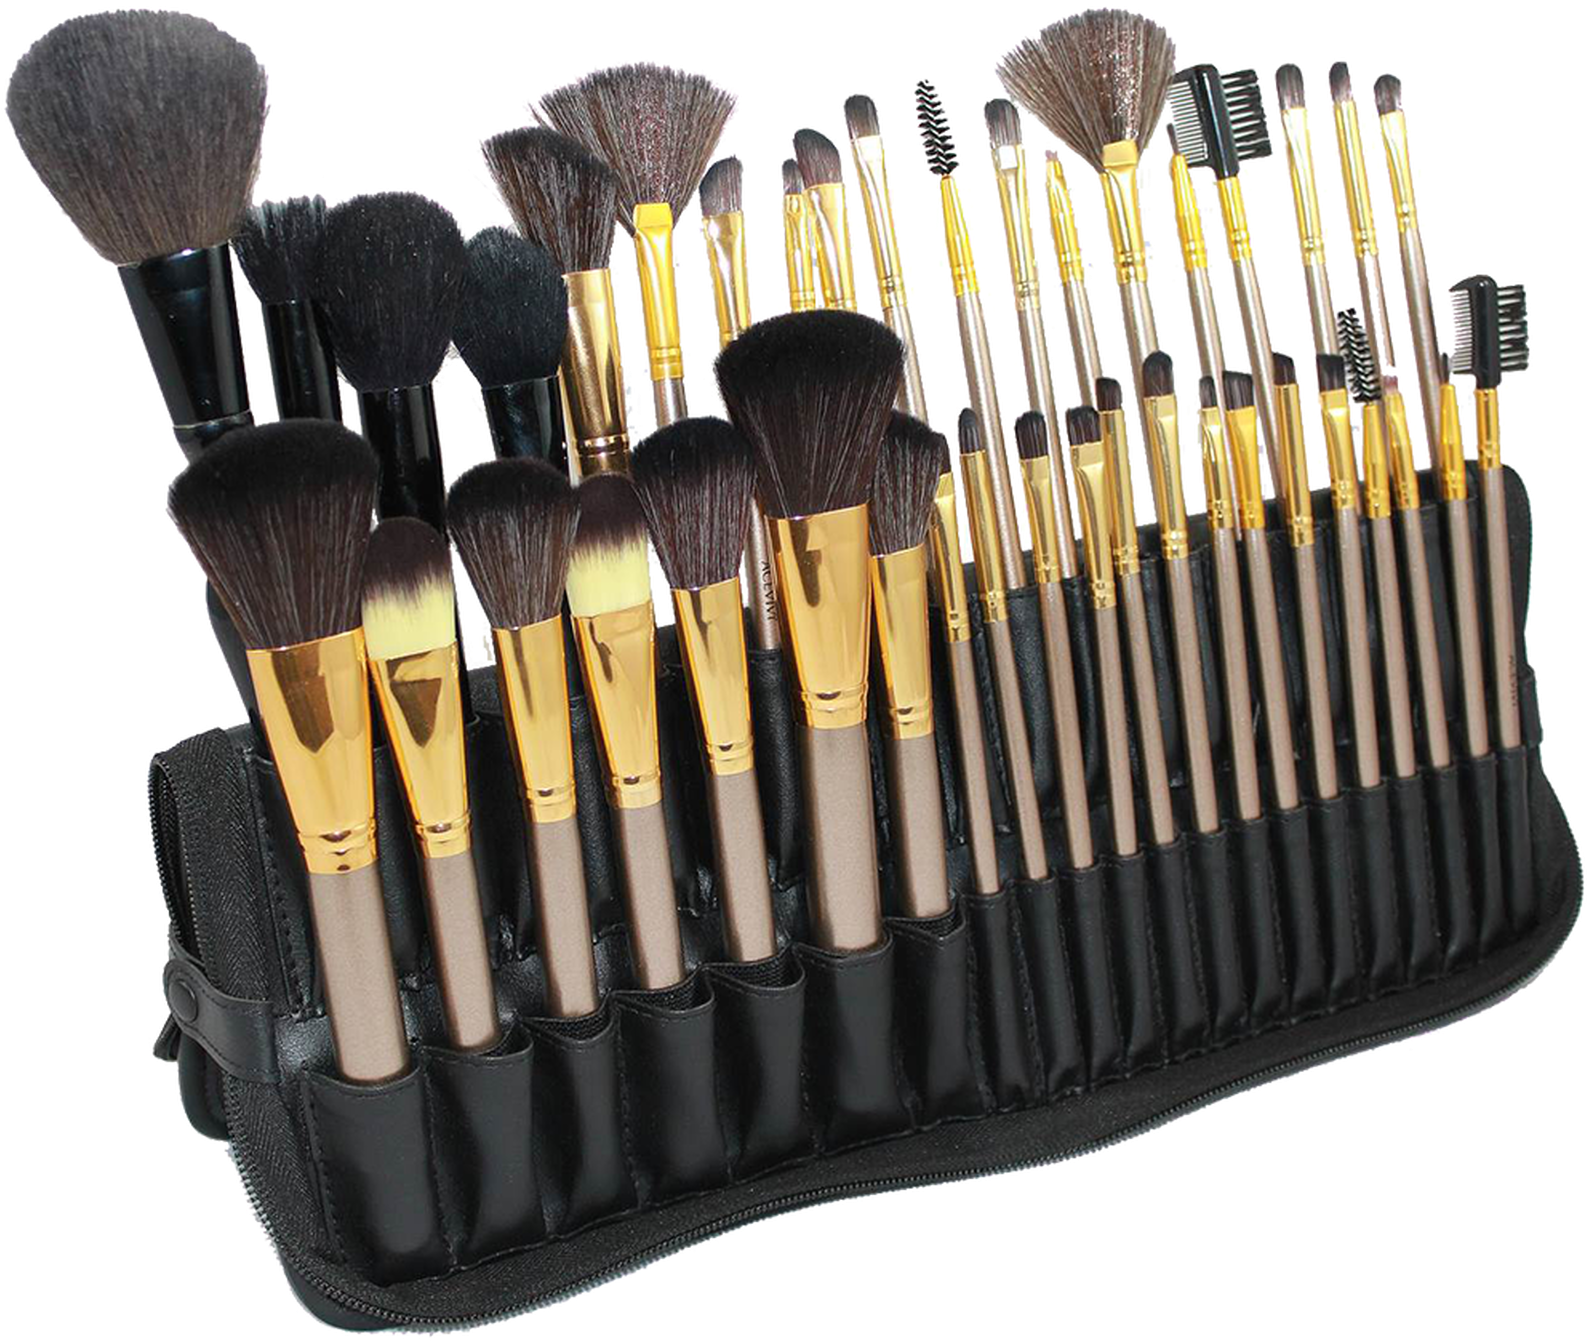 A Group Of Makeup Brushes In A Black Case